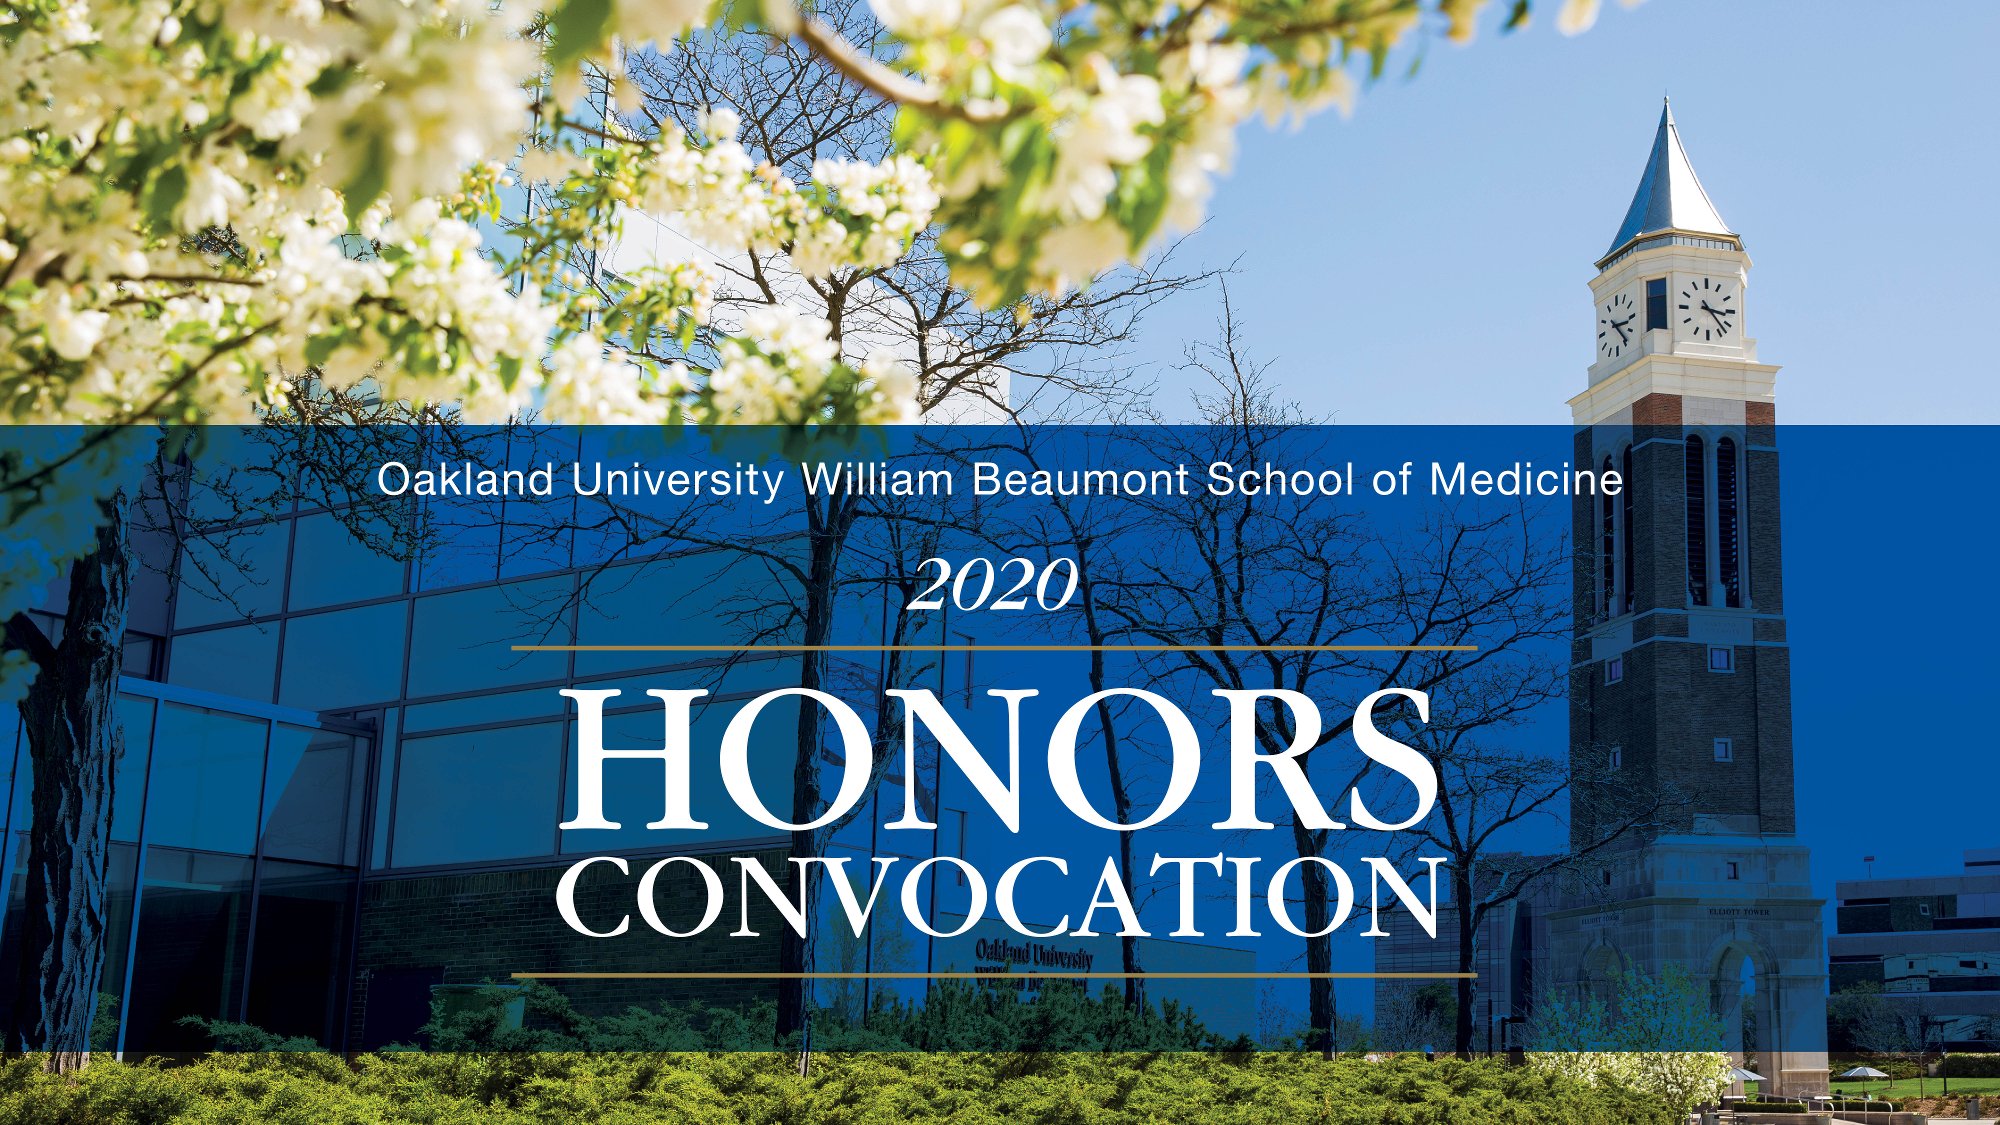 An image showing the 2020 Honors Convocation logo